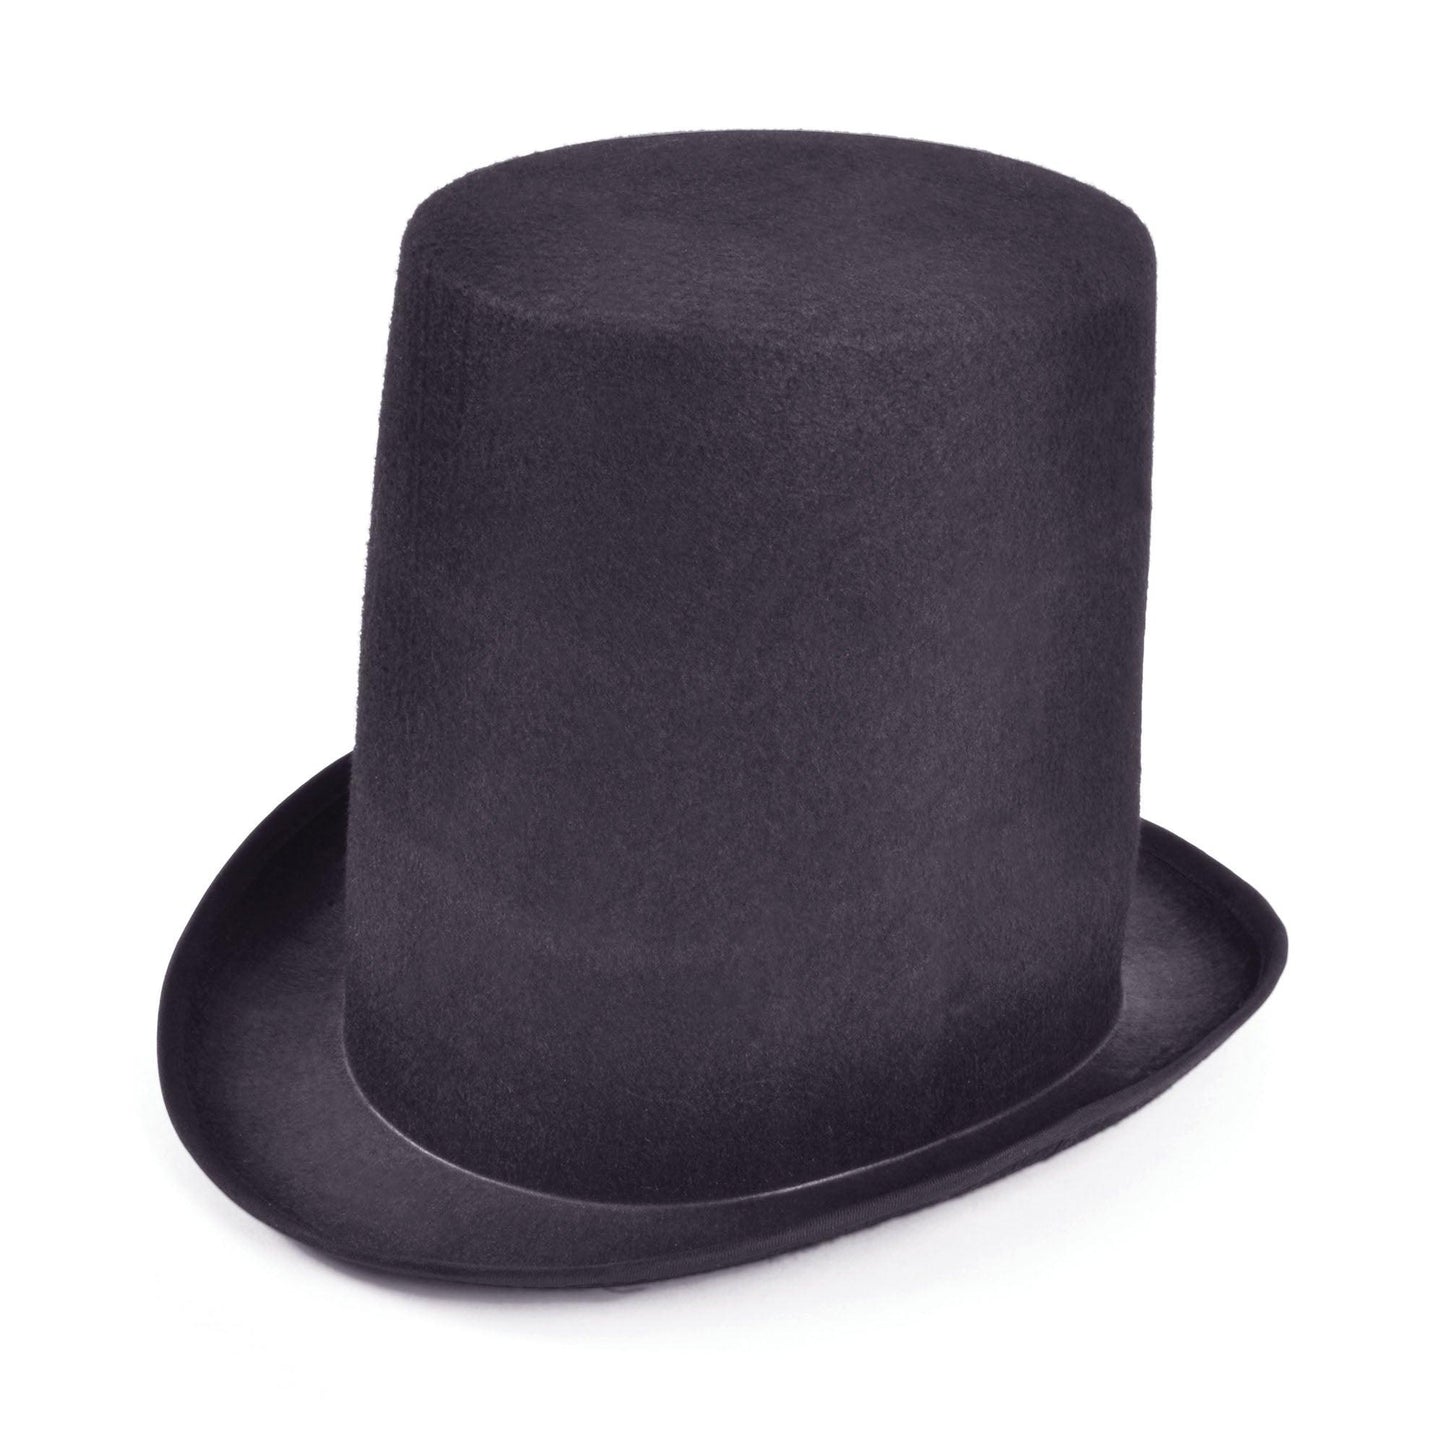 Stovepipe Top Hat Black - Labreeze